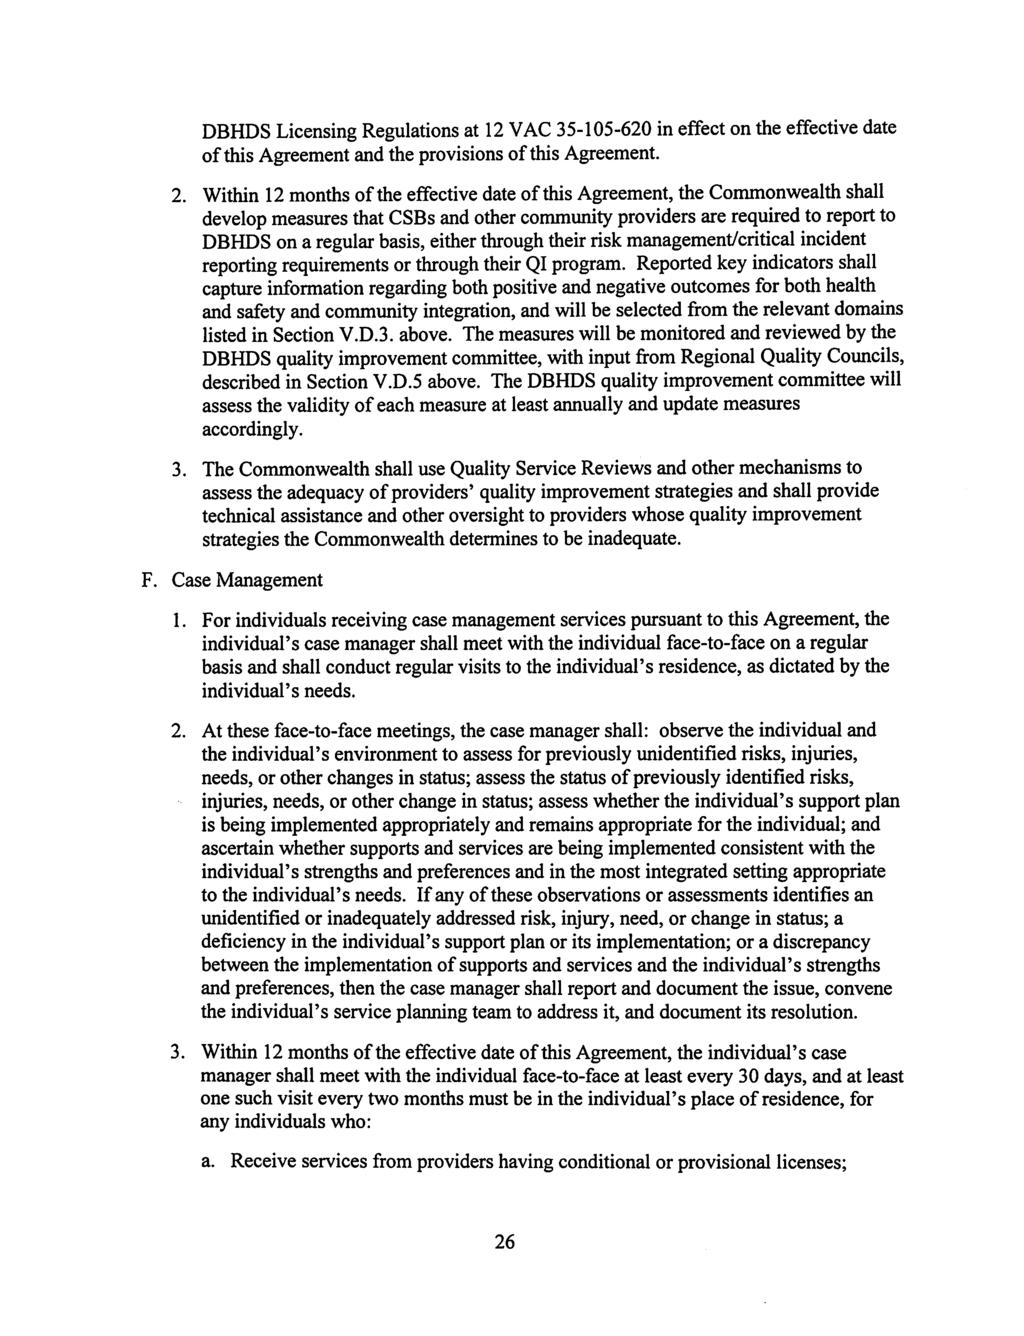 Case 3:12-cv-00059-JAG Document 112 Filed 08/23/12 Page 39 of 53 PageID# 4677 DBHDS Licensing Regulations at 12 VAC 35-105-620 in effectonthe effective date ofthis Agreement and the provisions ofthis